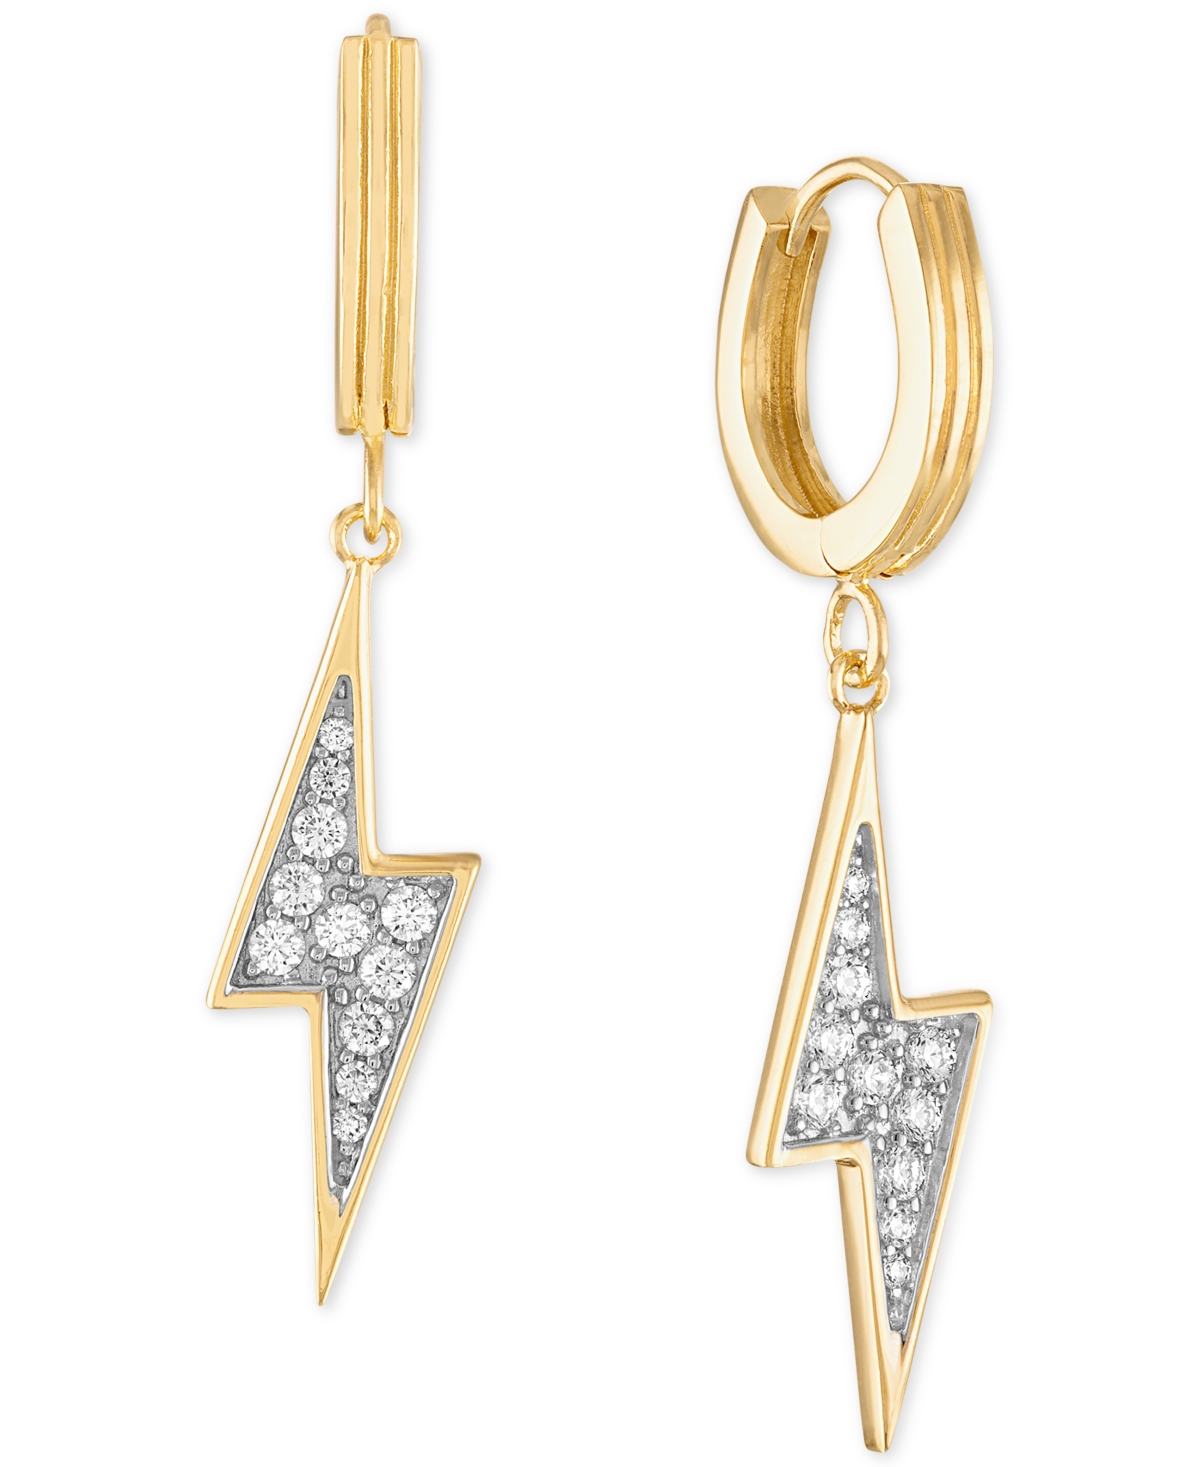 Cubic Zirconia Lightning Bolt Drop Earrings in 14k Gold-Plated Sterling Silver, Created for Macy's - Gold Over Silver